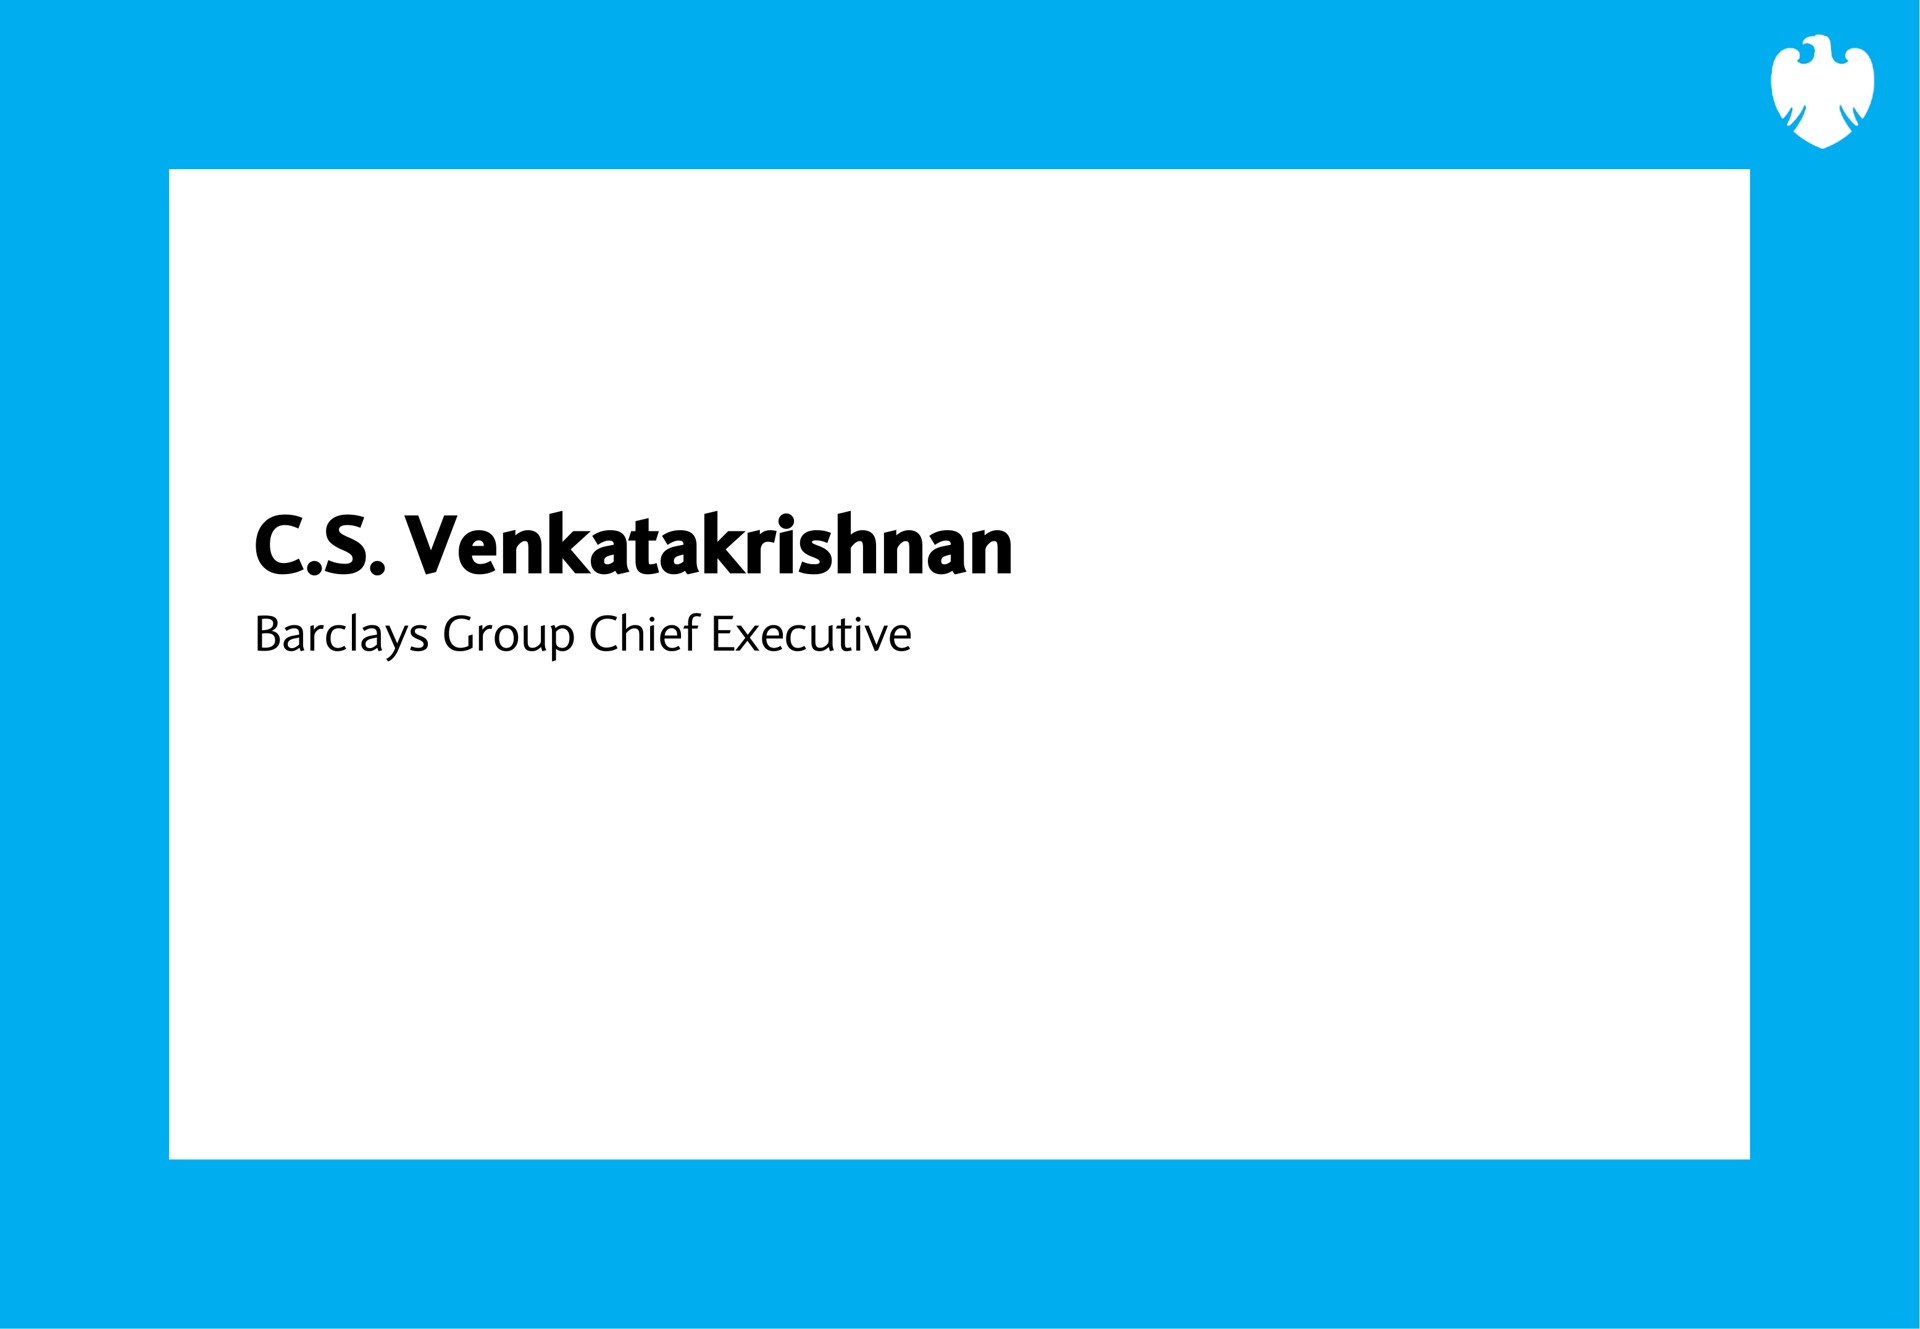 group chief executive | Barclays